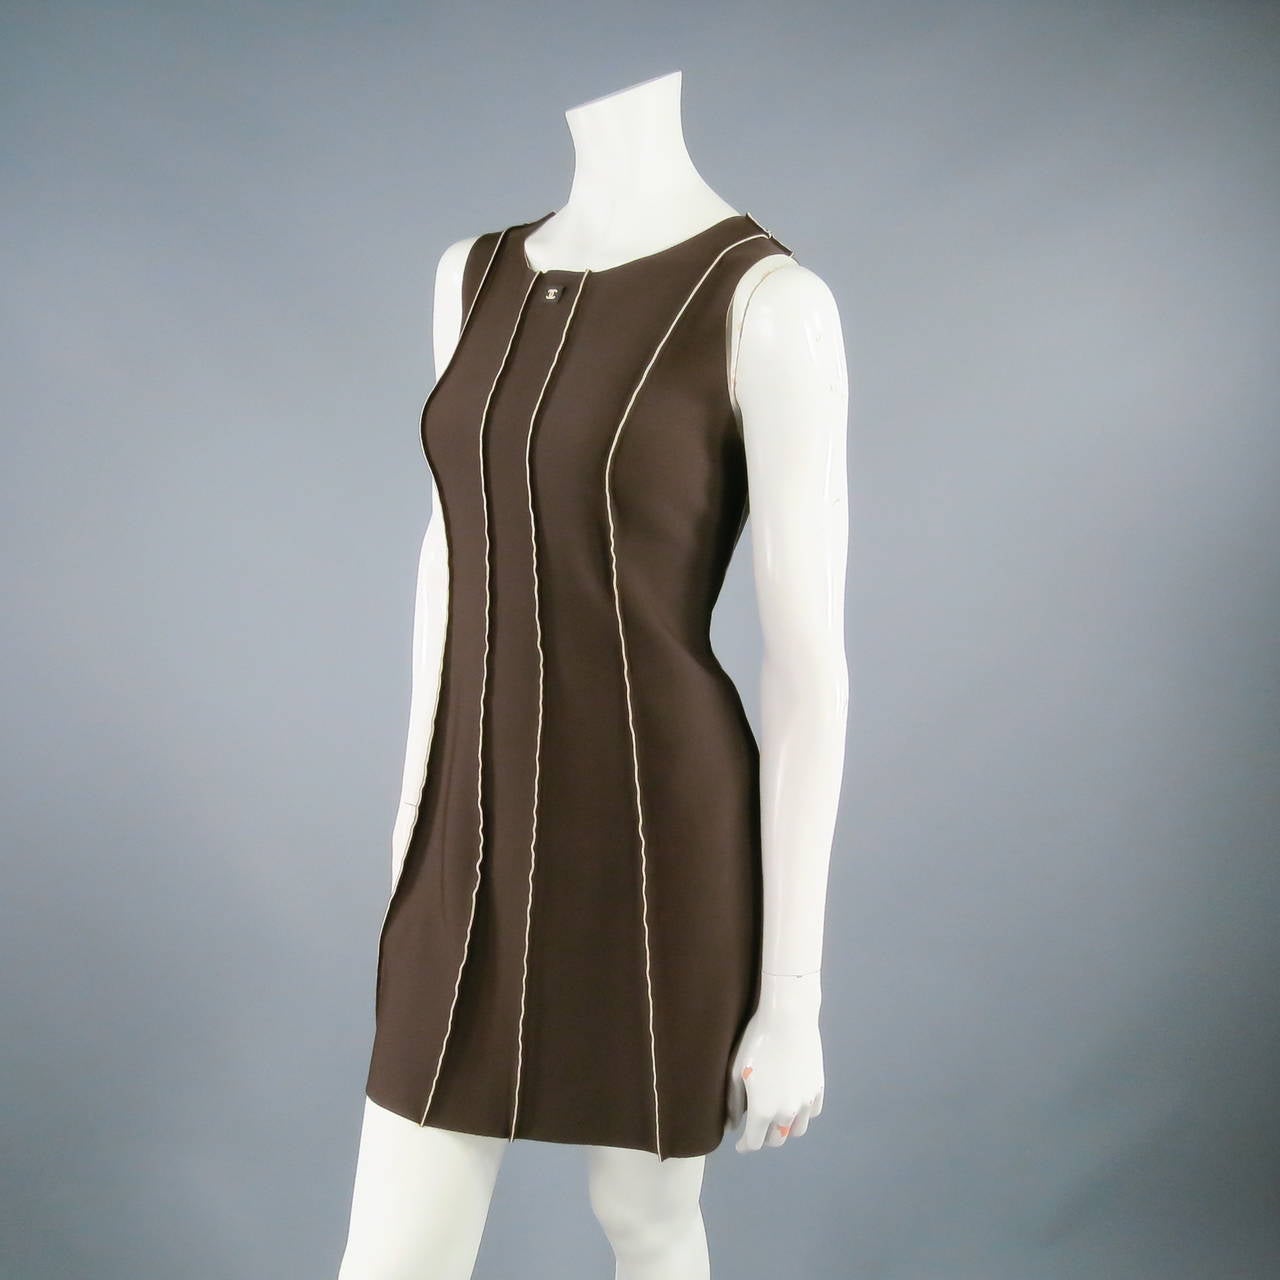 Fabulous scuba dress by CHANEL 1999P. A very unique find, this sleeveless A line style comes in a chocolate brown stretch neoprene and features exposed contrast lining along the seams and rubber 